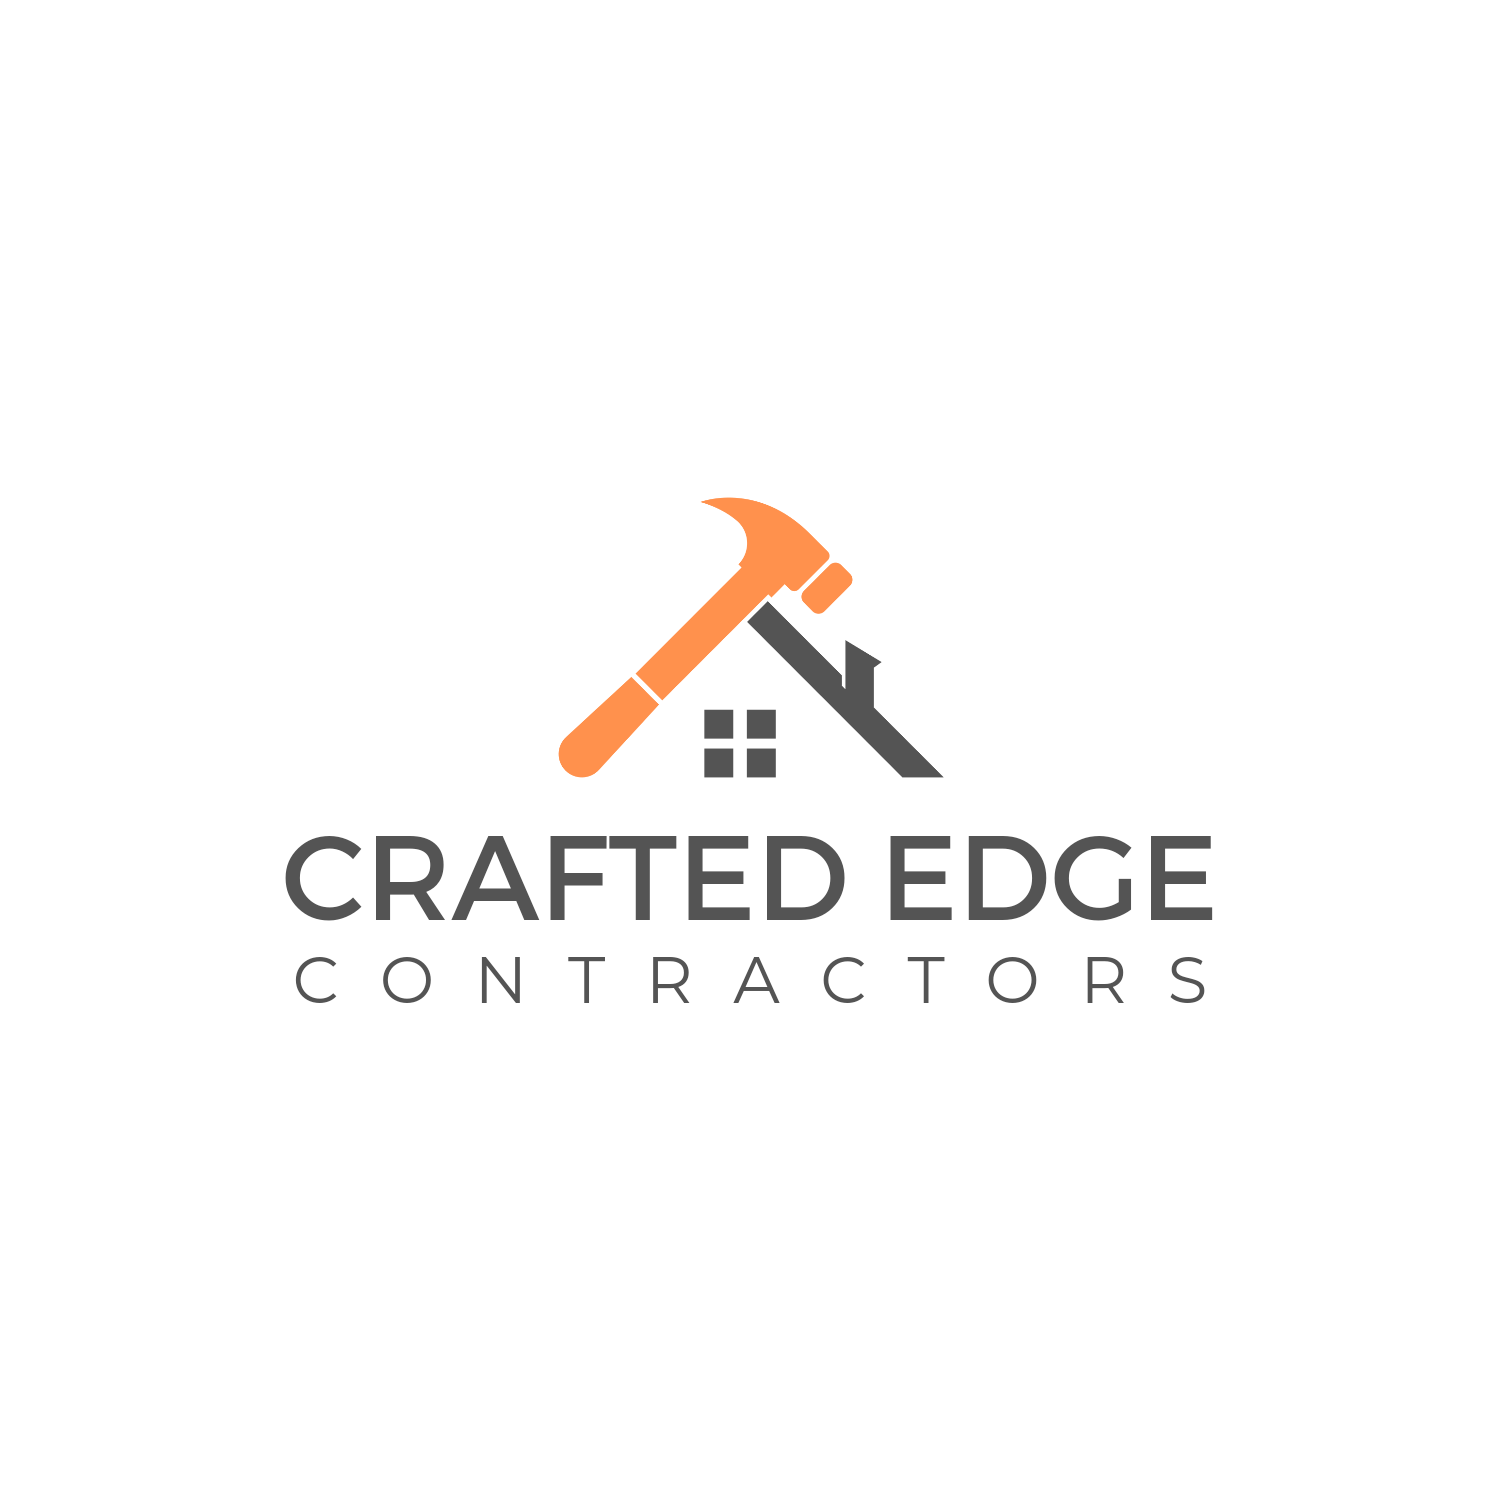 Crafted Edge Contractors